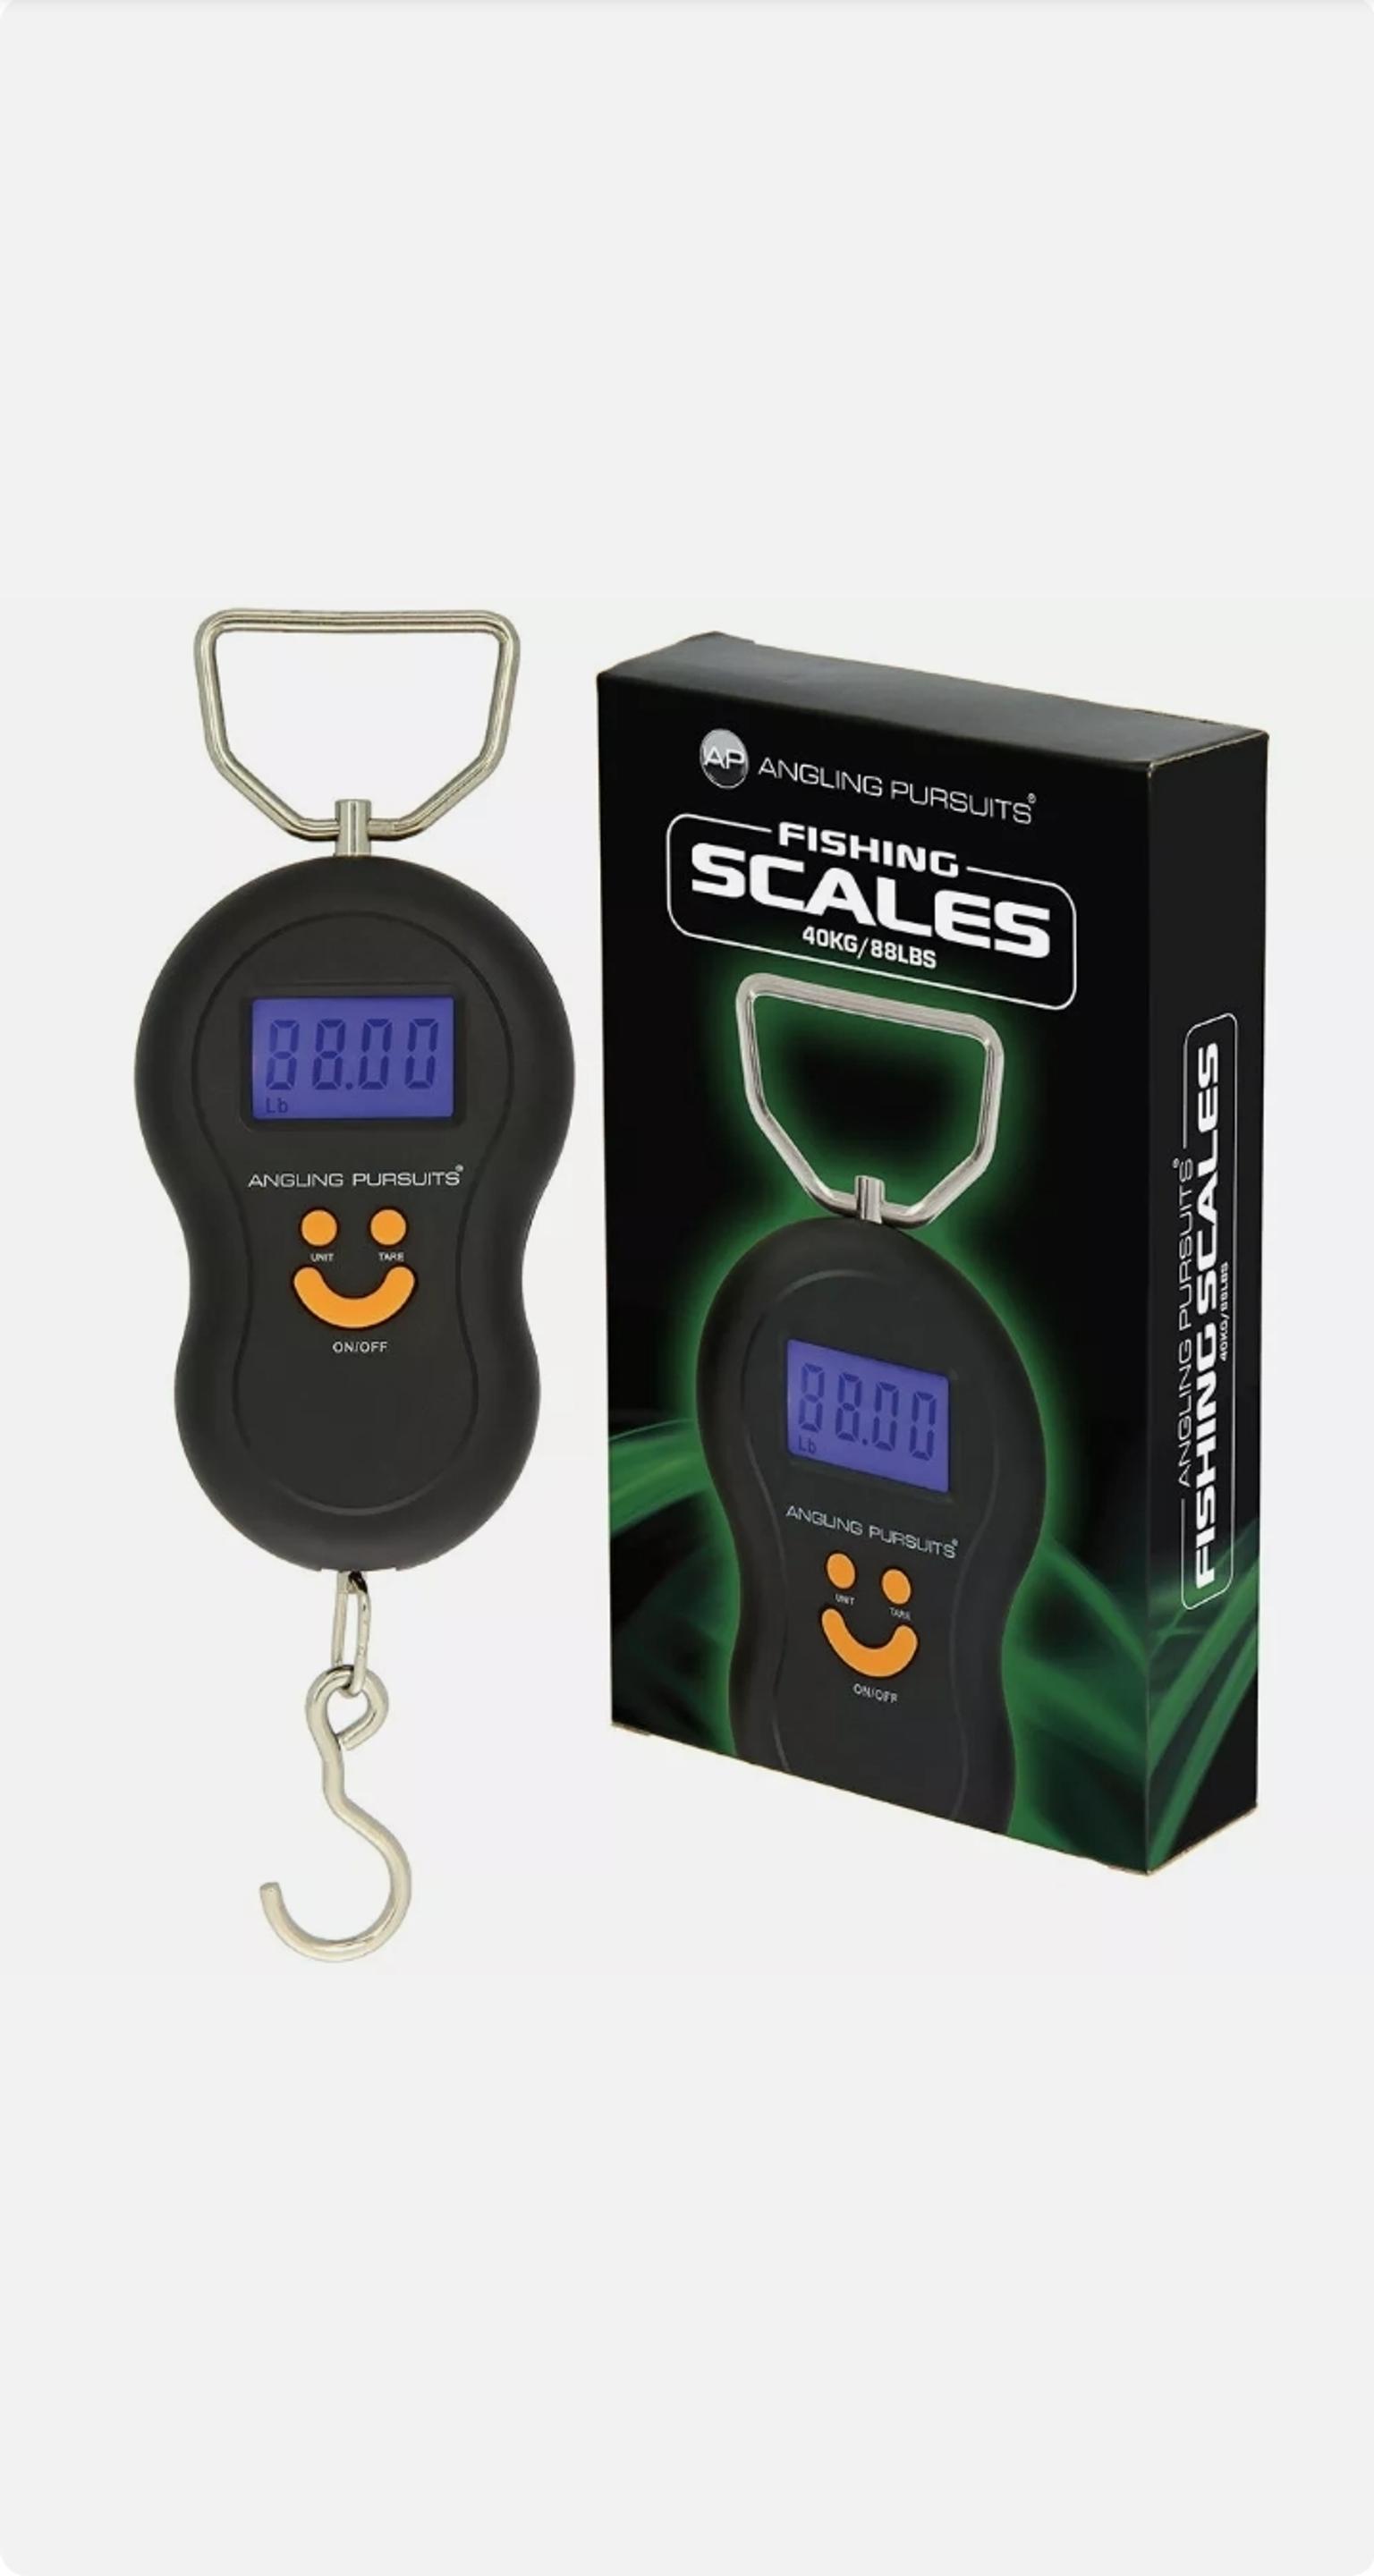 ANGLING PERSUITS DIGITAL FISHING SCALES 40KG 88LB ELECTRONIC SCALES WITH HOOK 